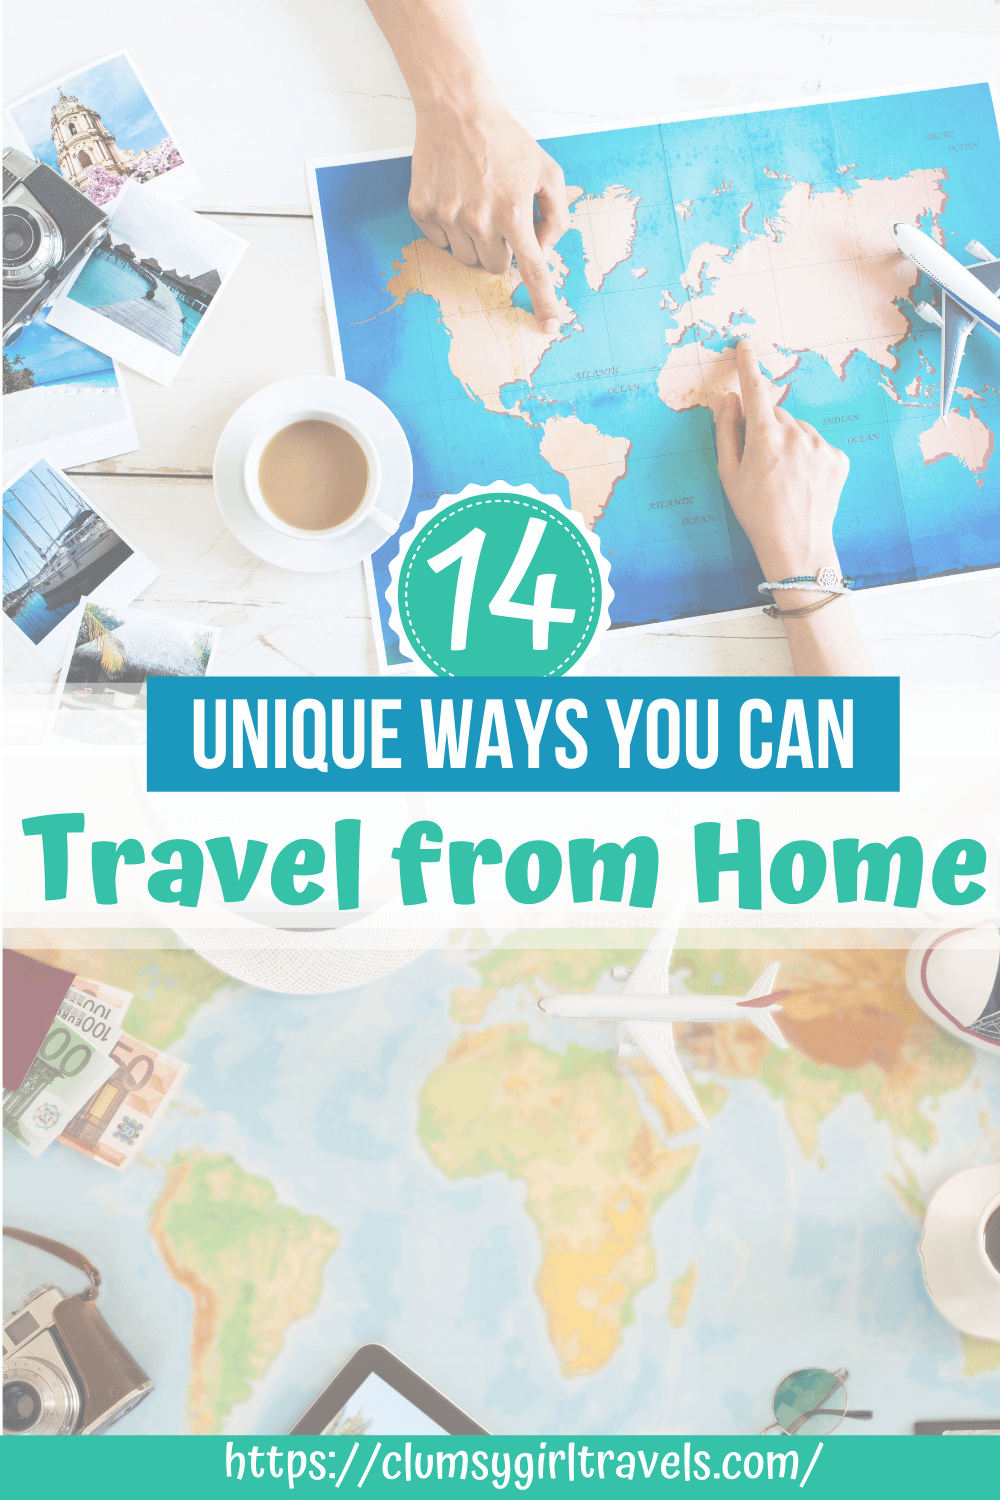 Are you stuck at home, but itching to go on vacation? Here are 14 unique ways you can travel from home. #travelfromhome #virtualtravel